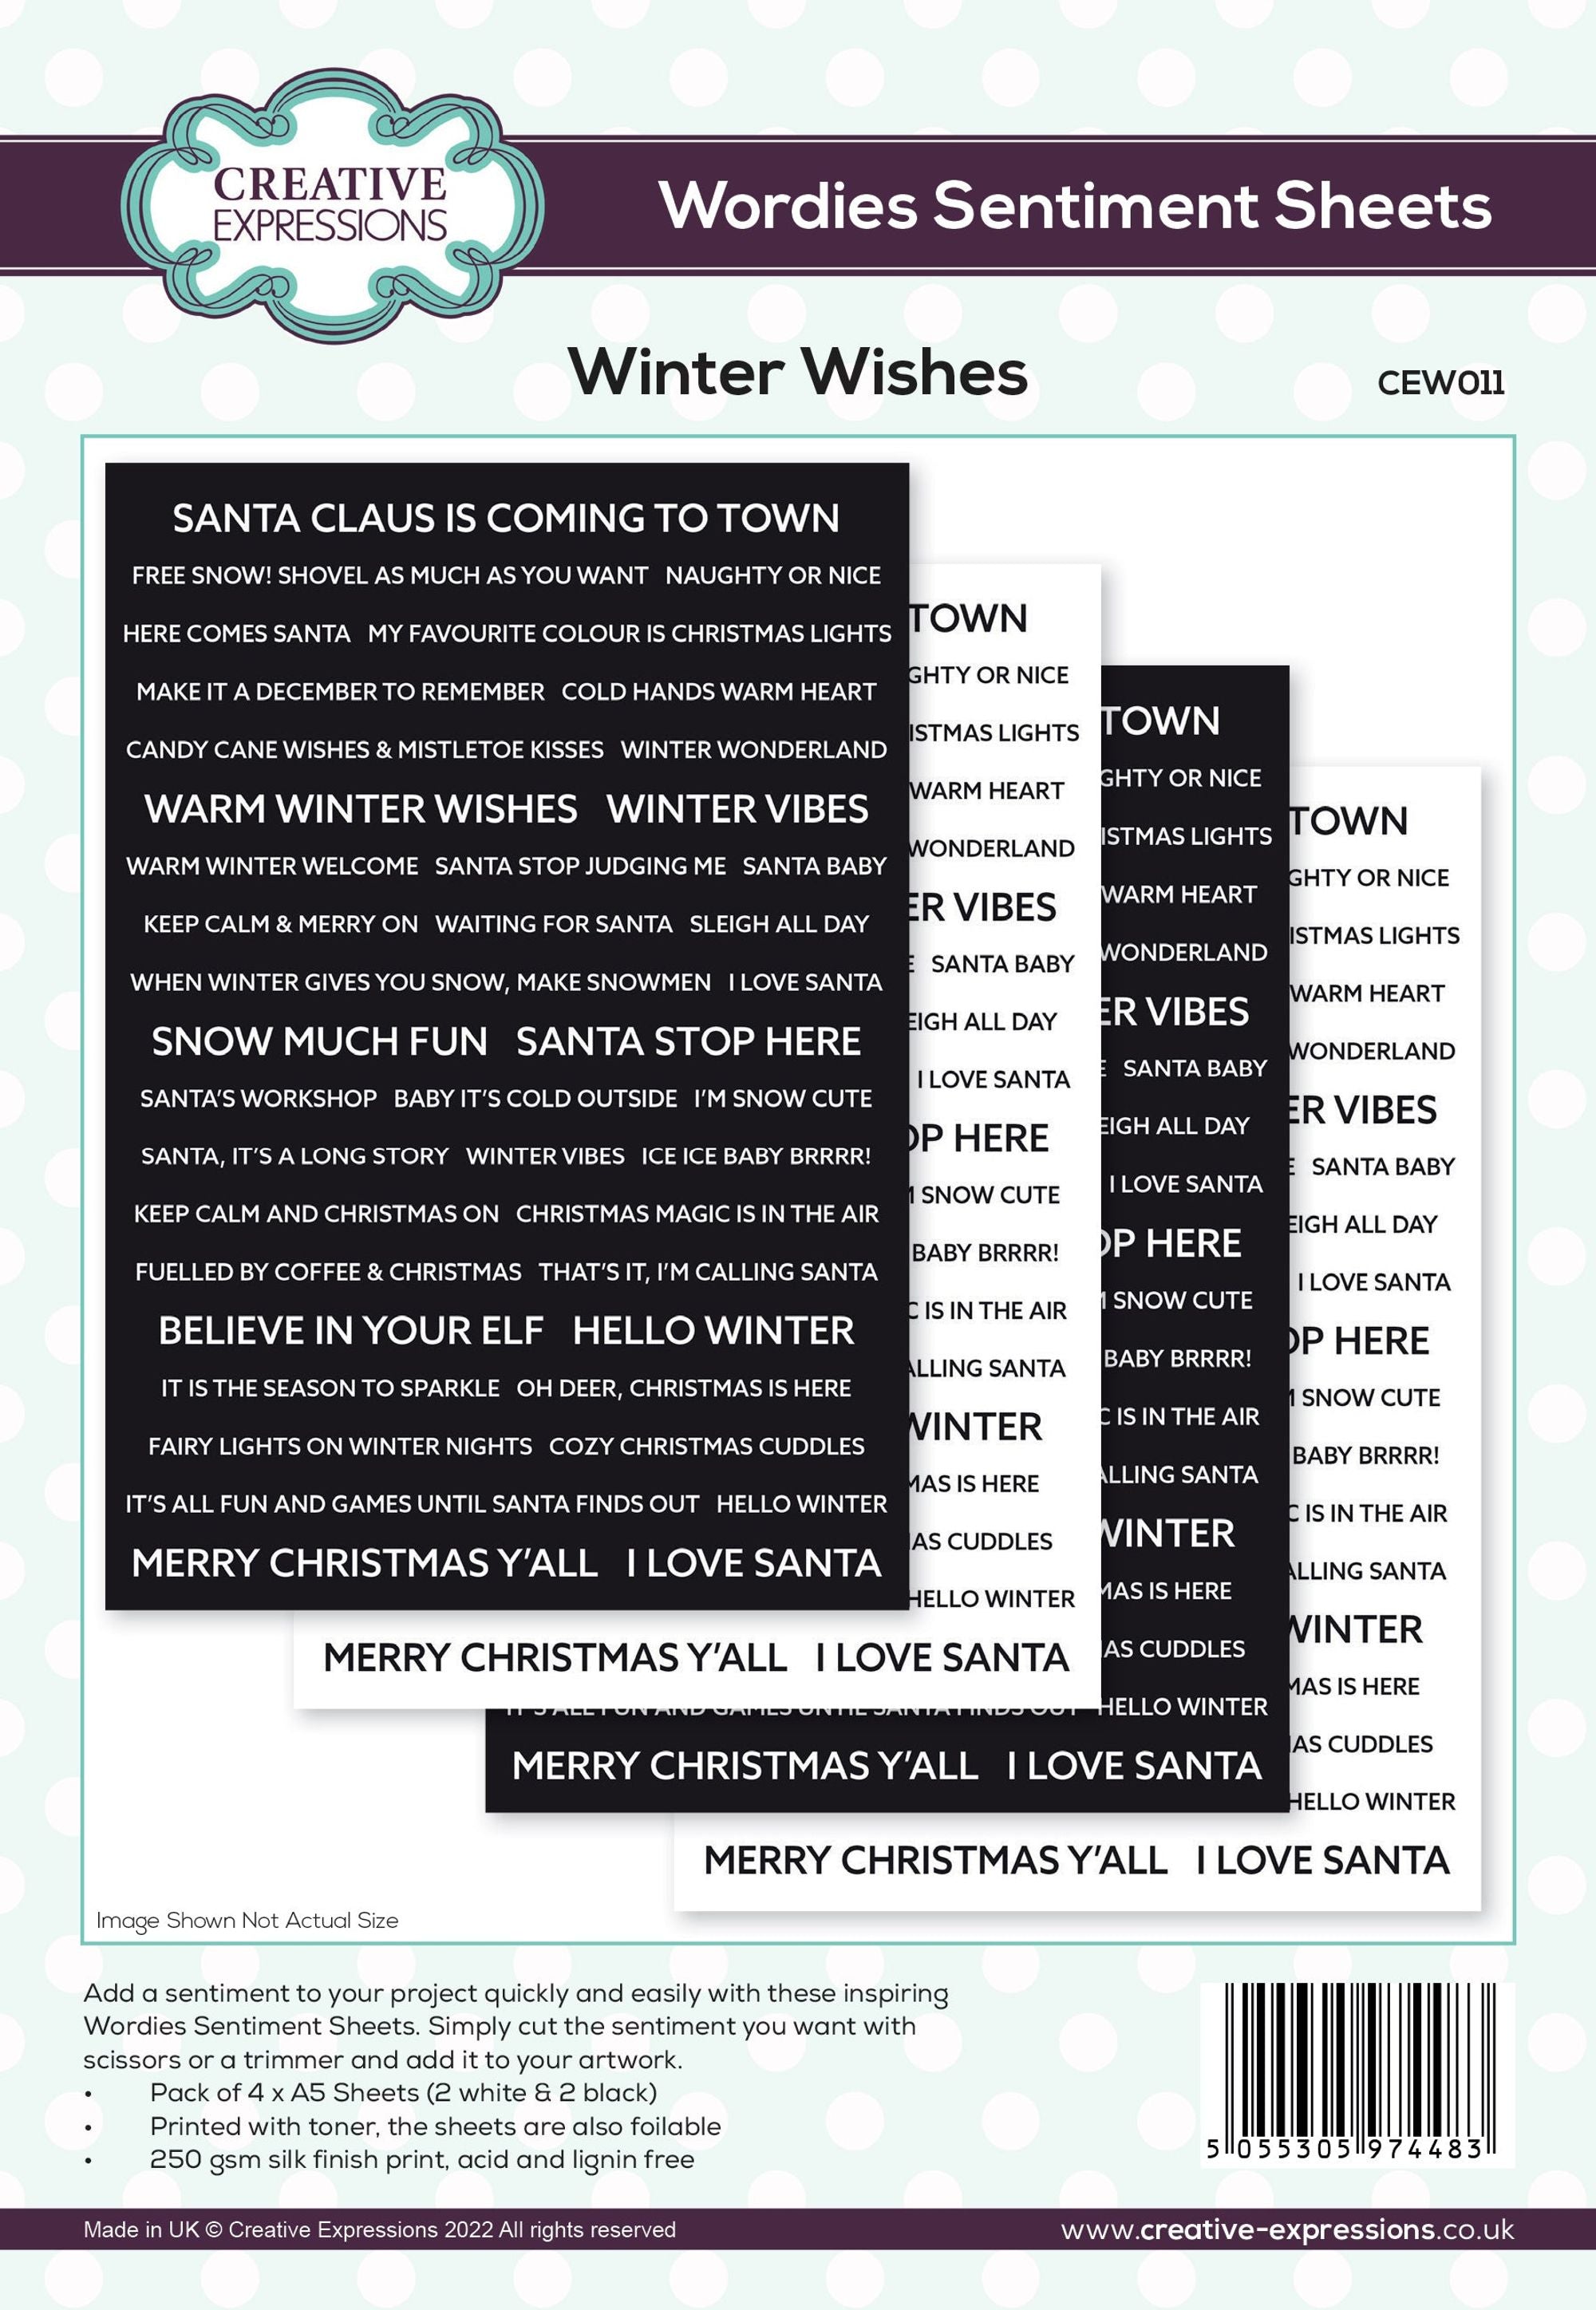 Creative Expressions Wordies Sentiment Sheets - Winter Wishes Pk 4 6 in x 8 in